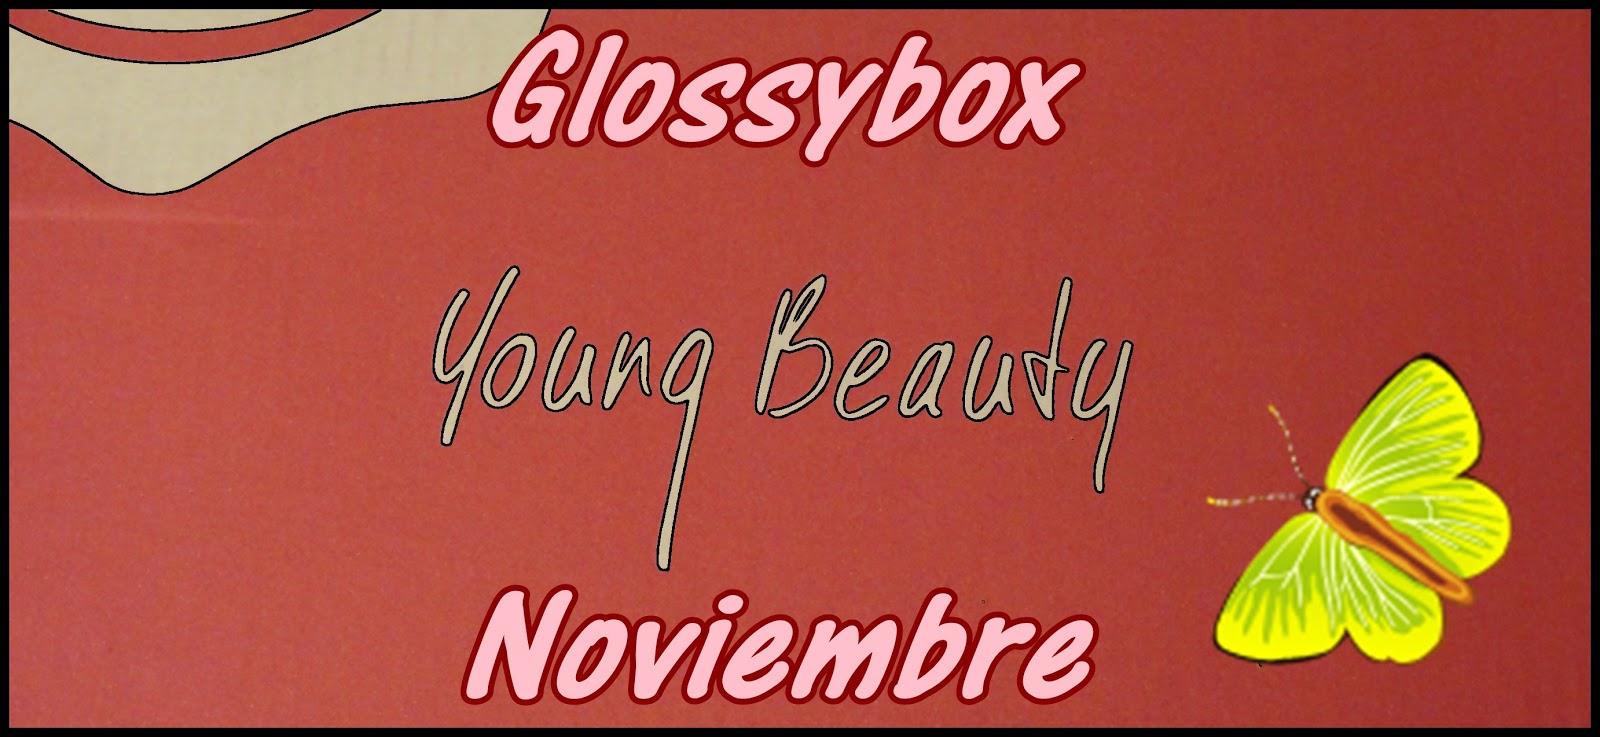 Glossybox Young Beauty y animales humanizados